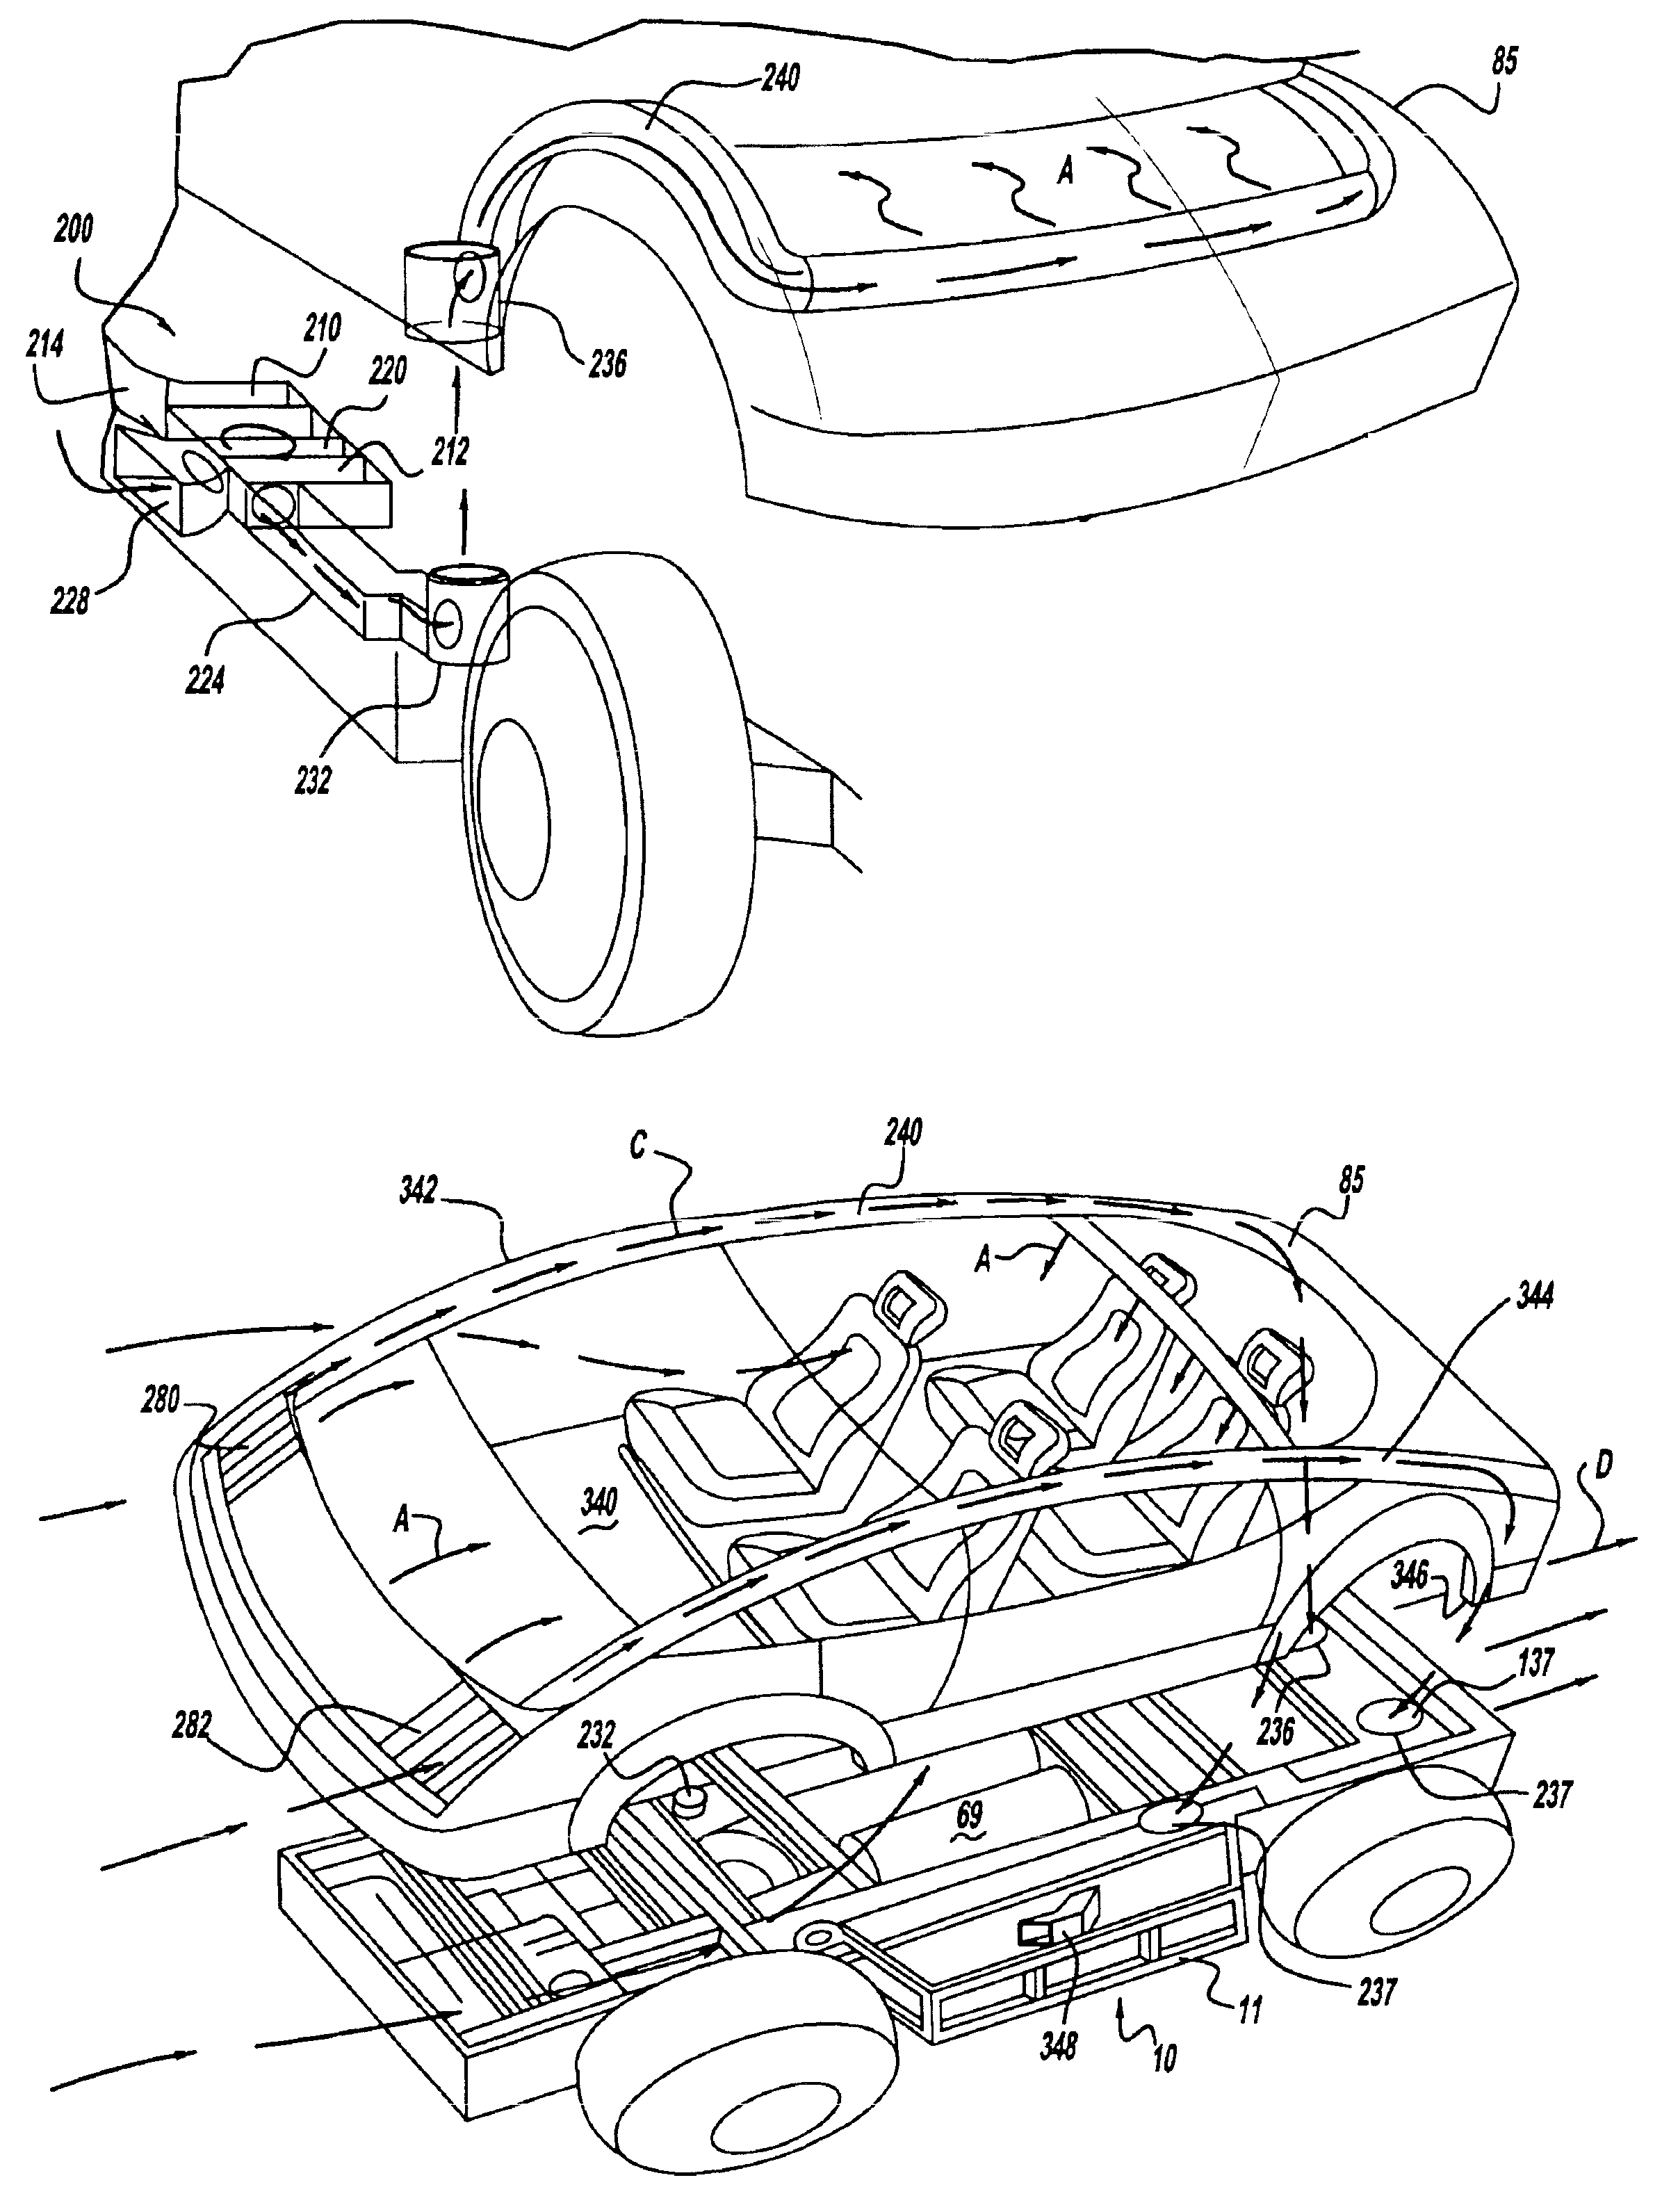 Mobile chassis and interchangeable vehicle body with waste heat rejection system